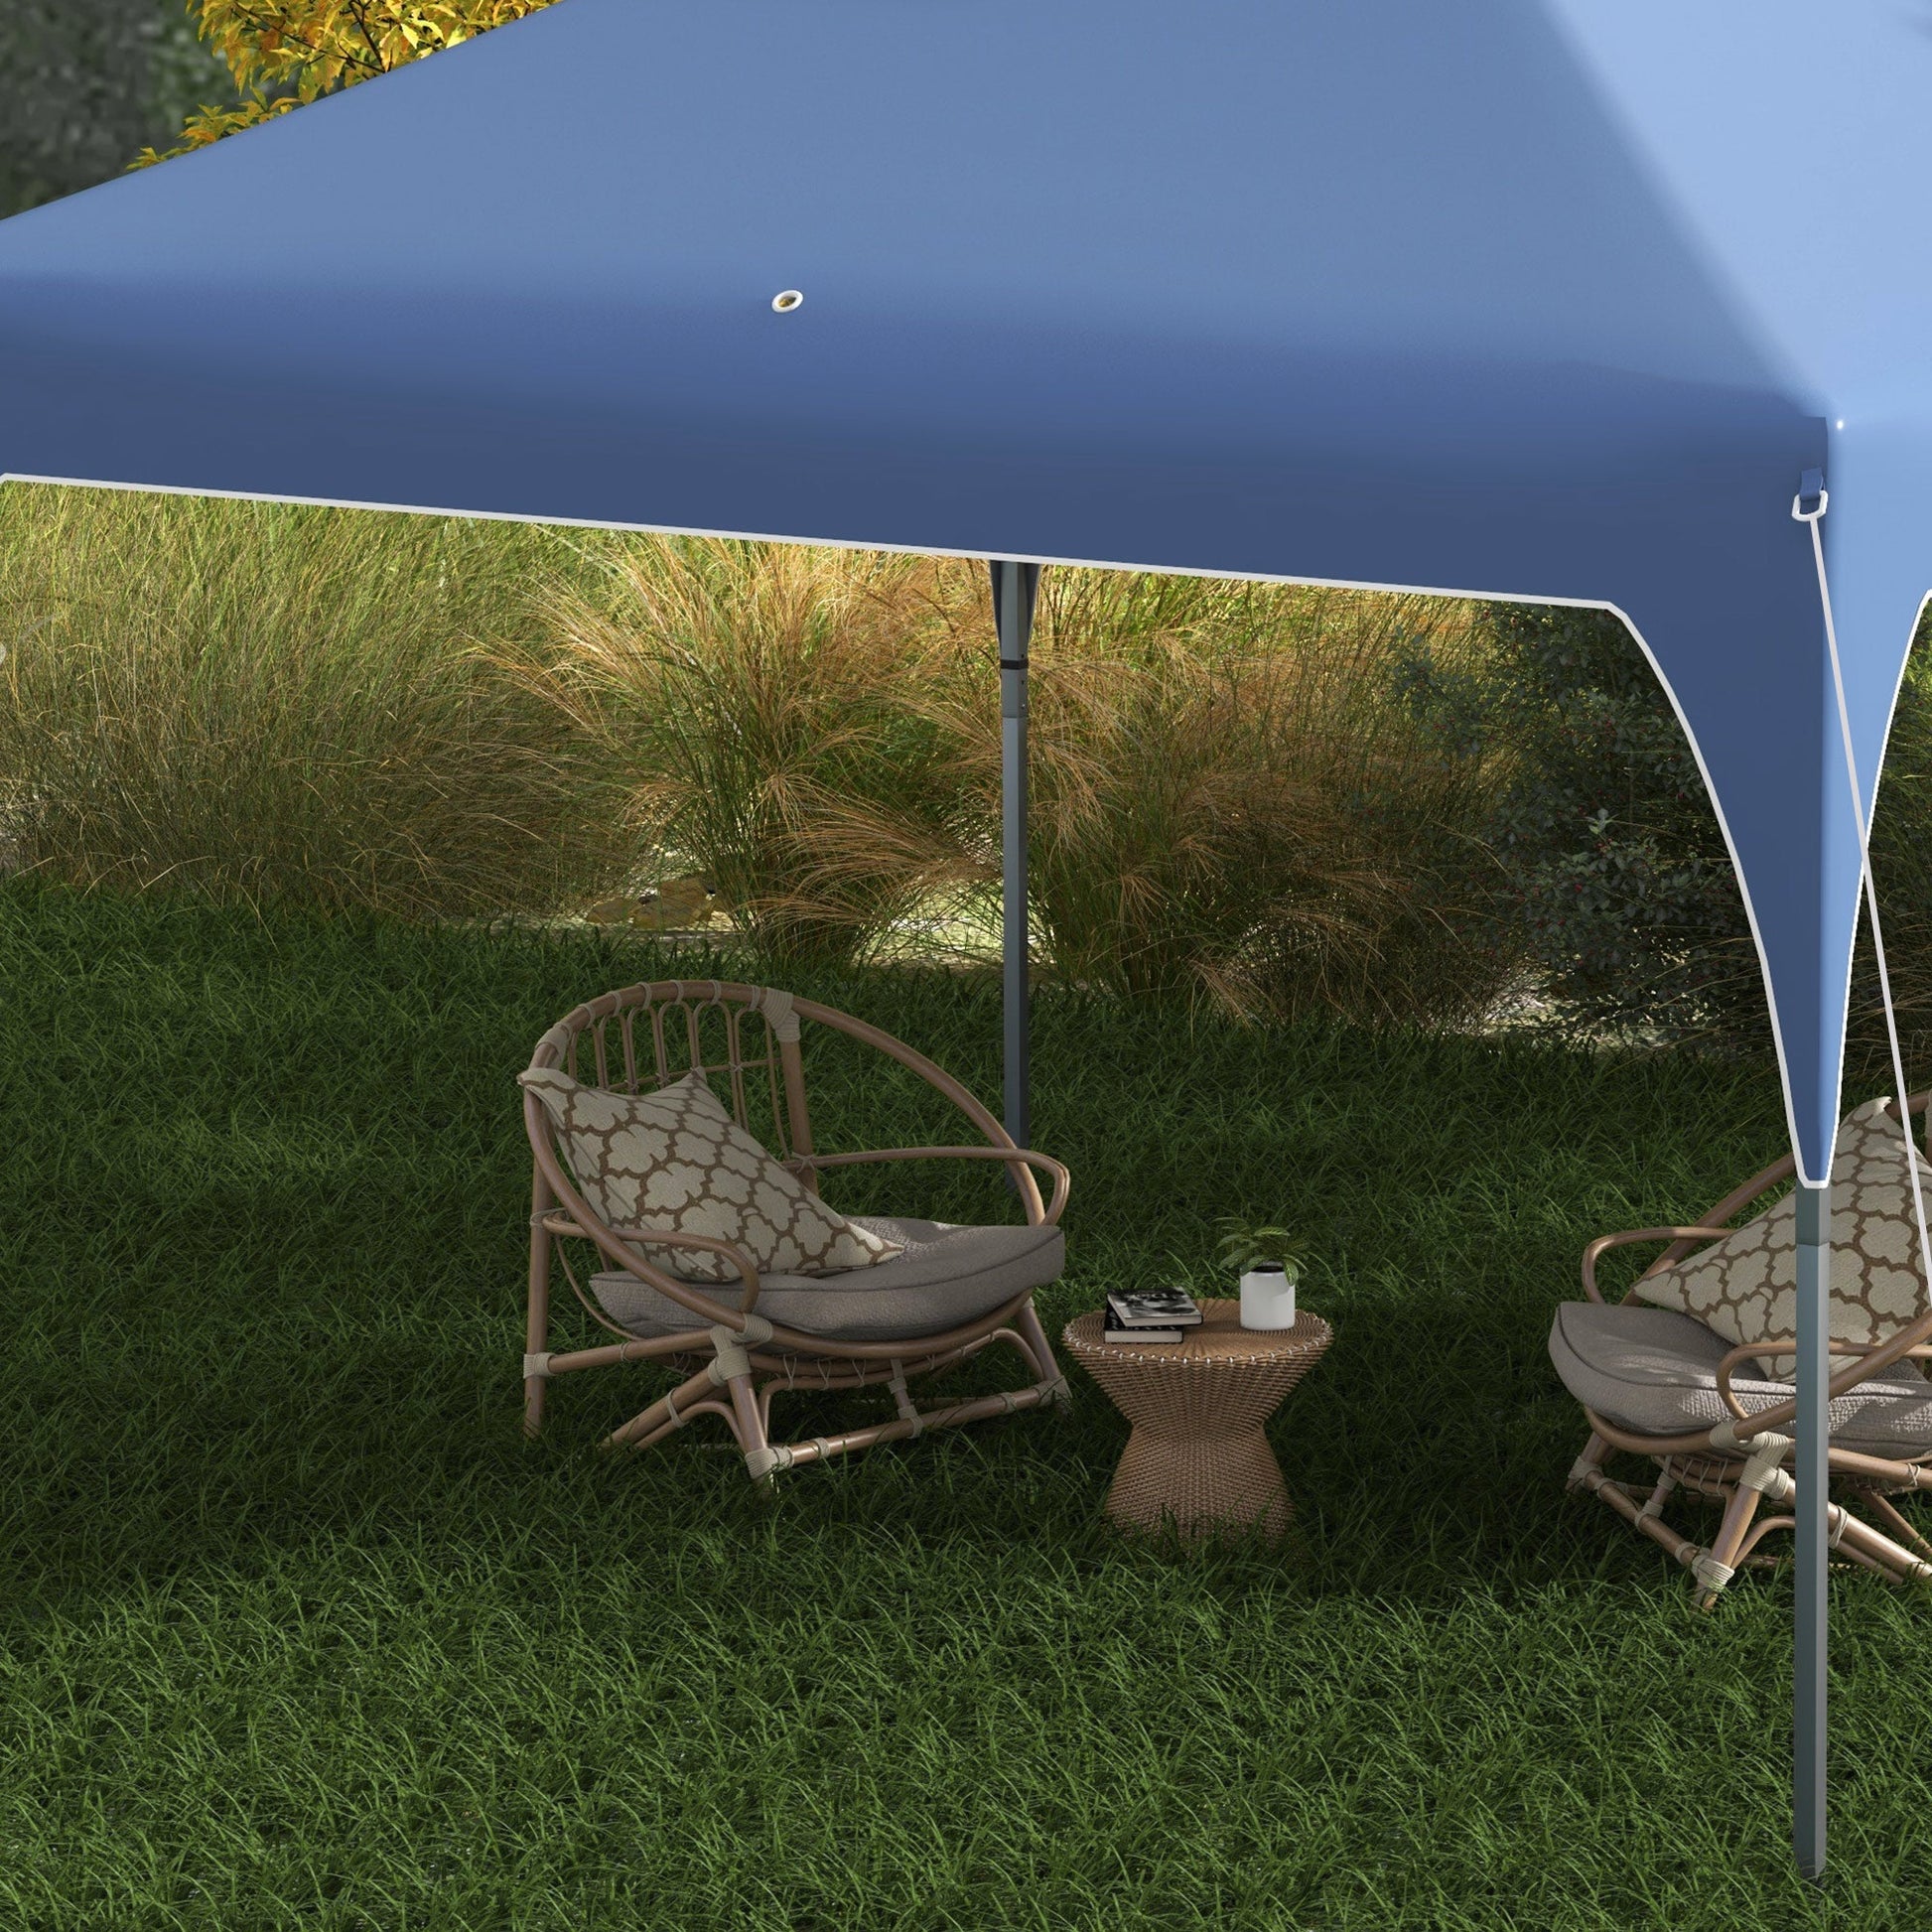 10'x10' Pop Up Canopy, Easy Set Up Party Tent with 2 Tier Vented Roof and Carrying Bag for Outdoor, Garden, Camping, Blue at Gallery Canada